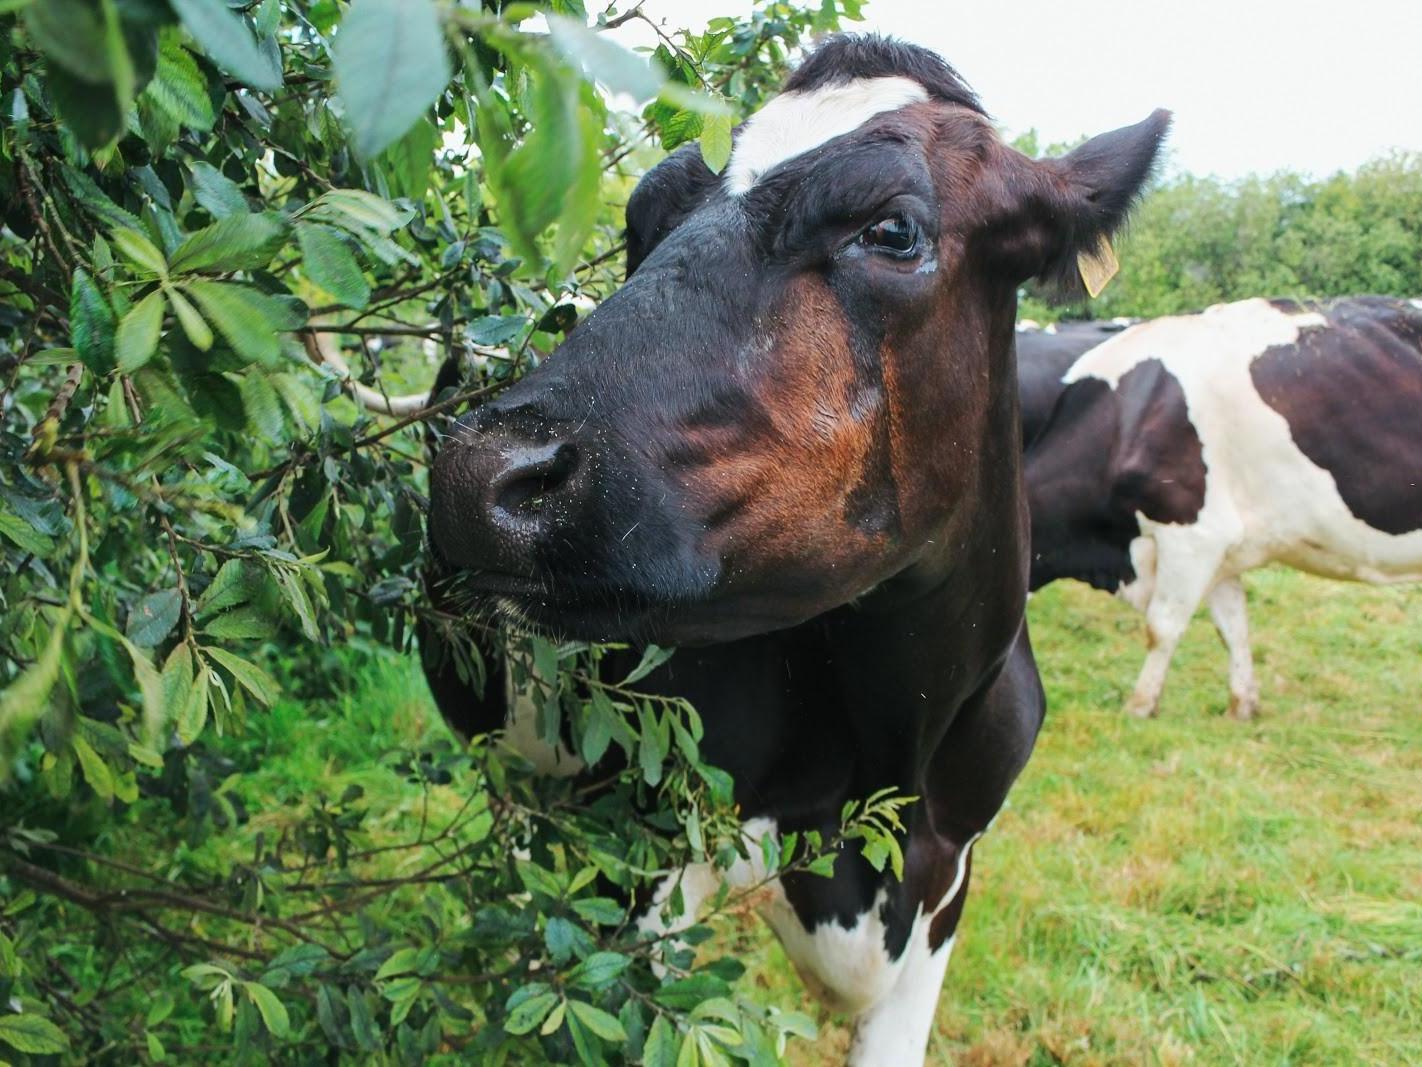 Amazing graze: cows like to munch on hedgerows and trees – mulberry leaves are high in protein and willow bark has painkilling properties